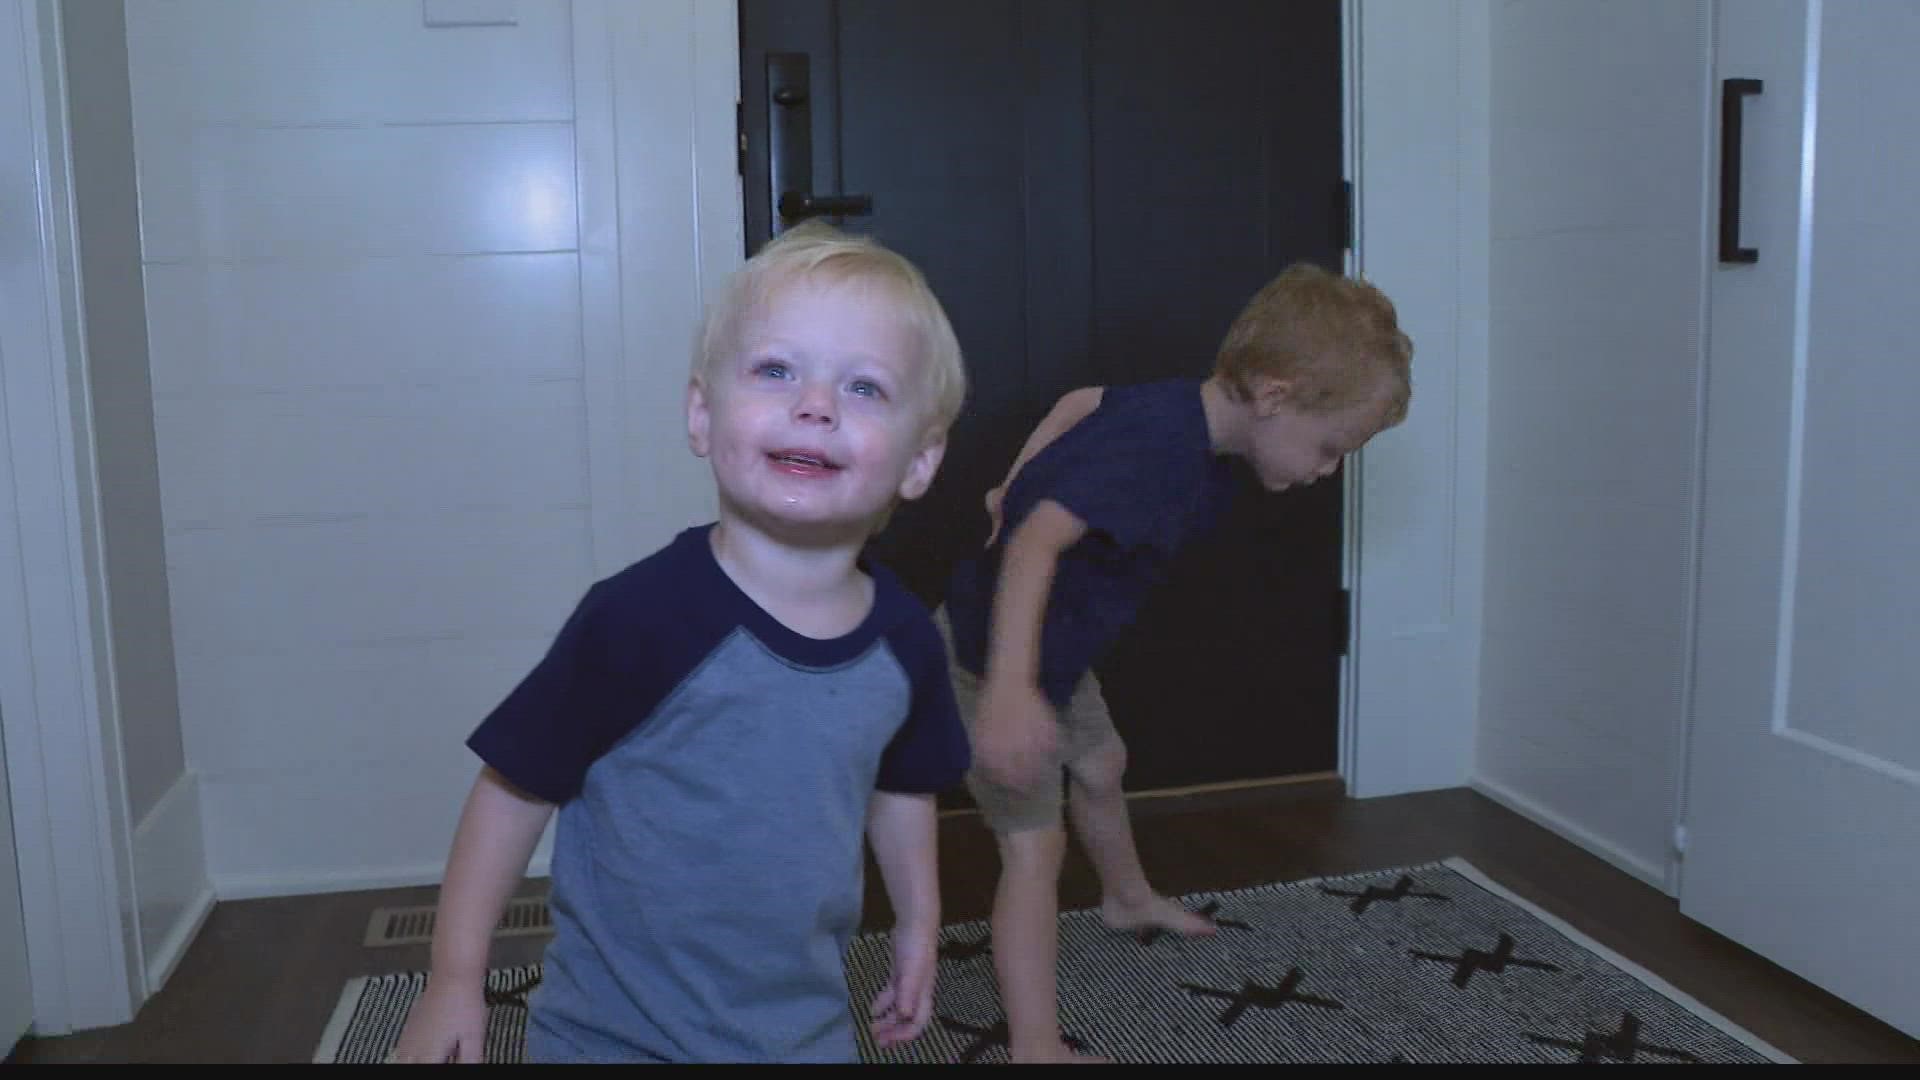 At nearly 2 years old, Wyatt Perdue is an active toddler with seemingly boundless energy.